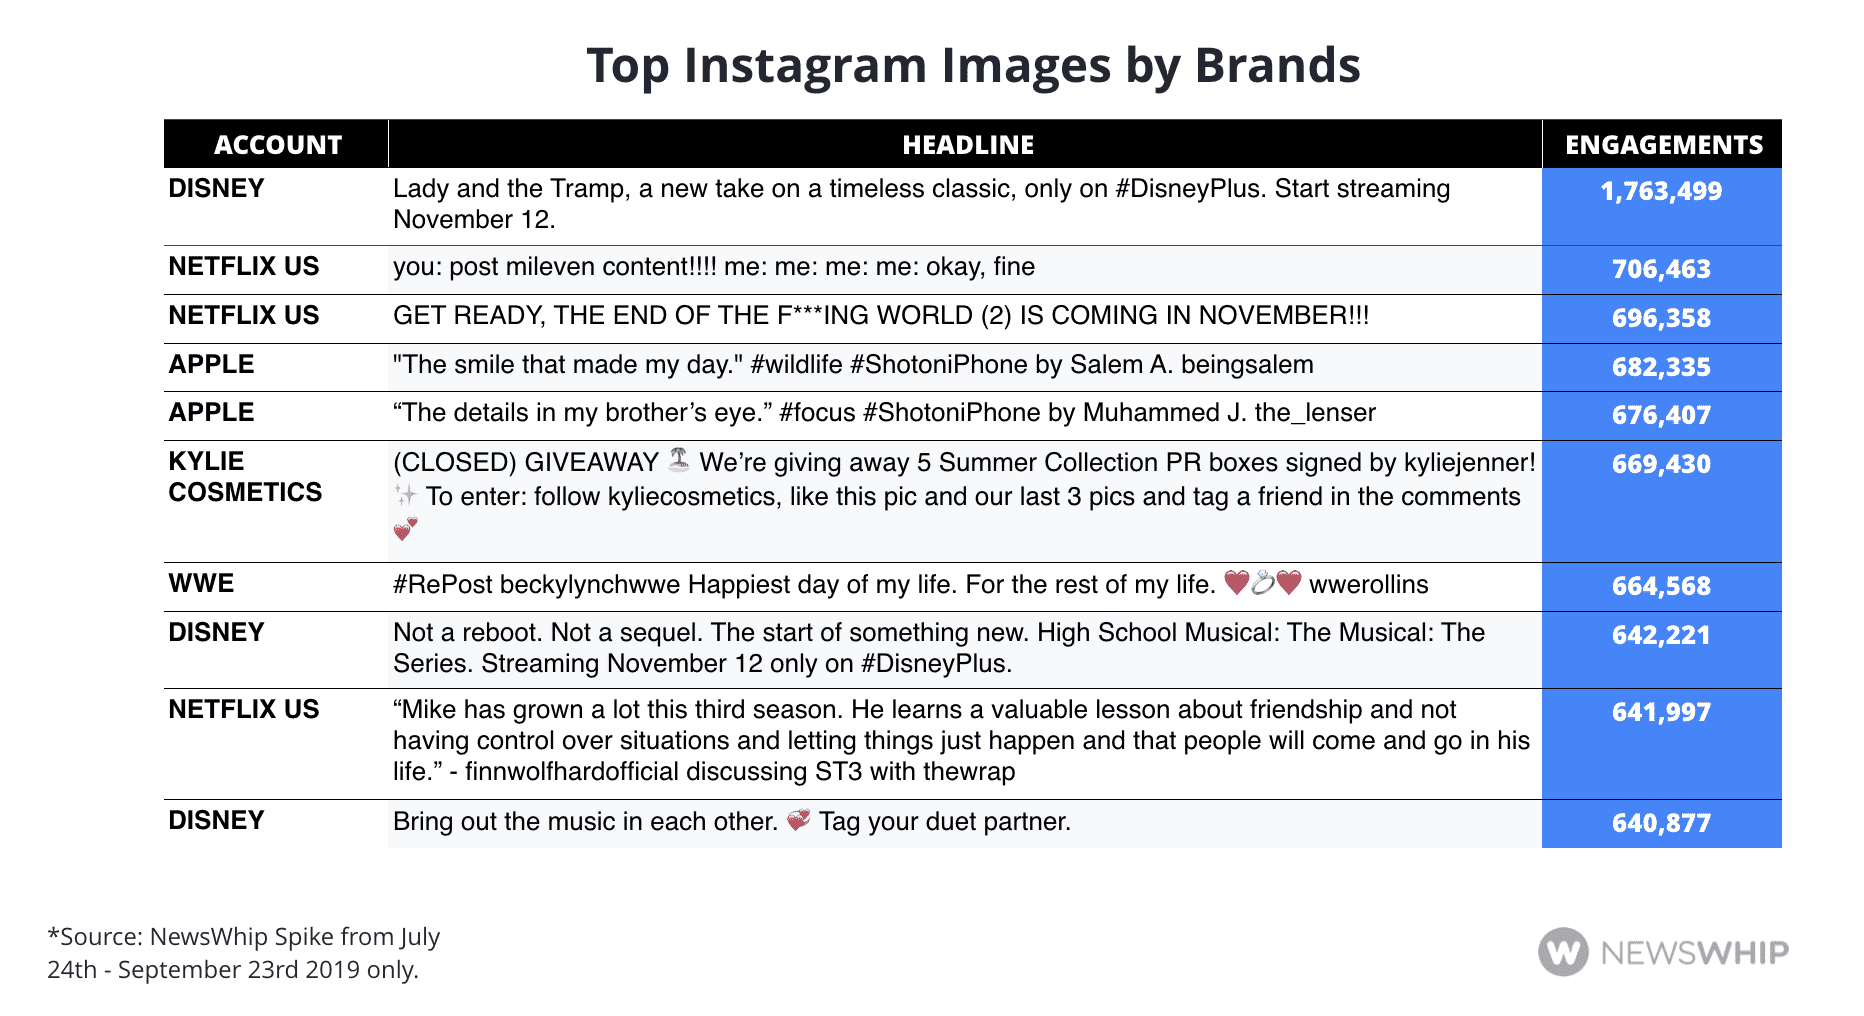 Table of the top ten most engaged Instagram images from brands in Q3 2019